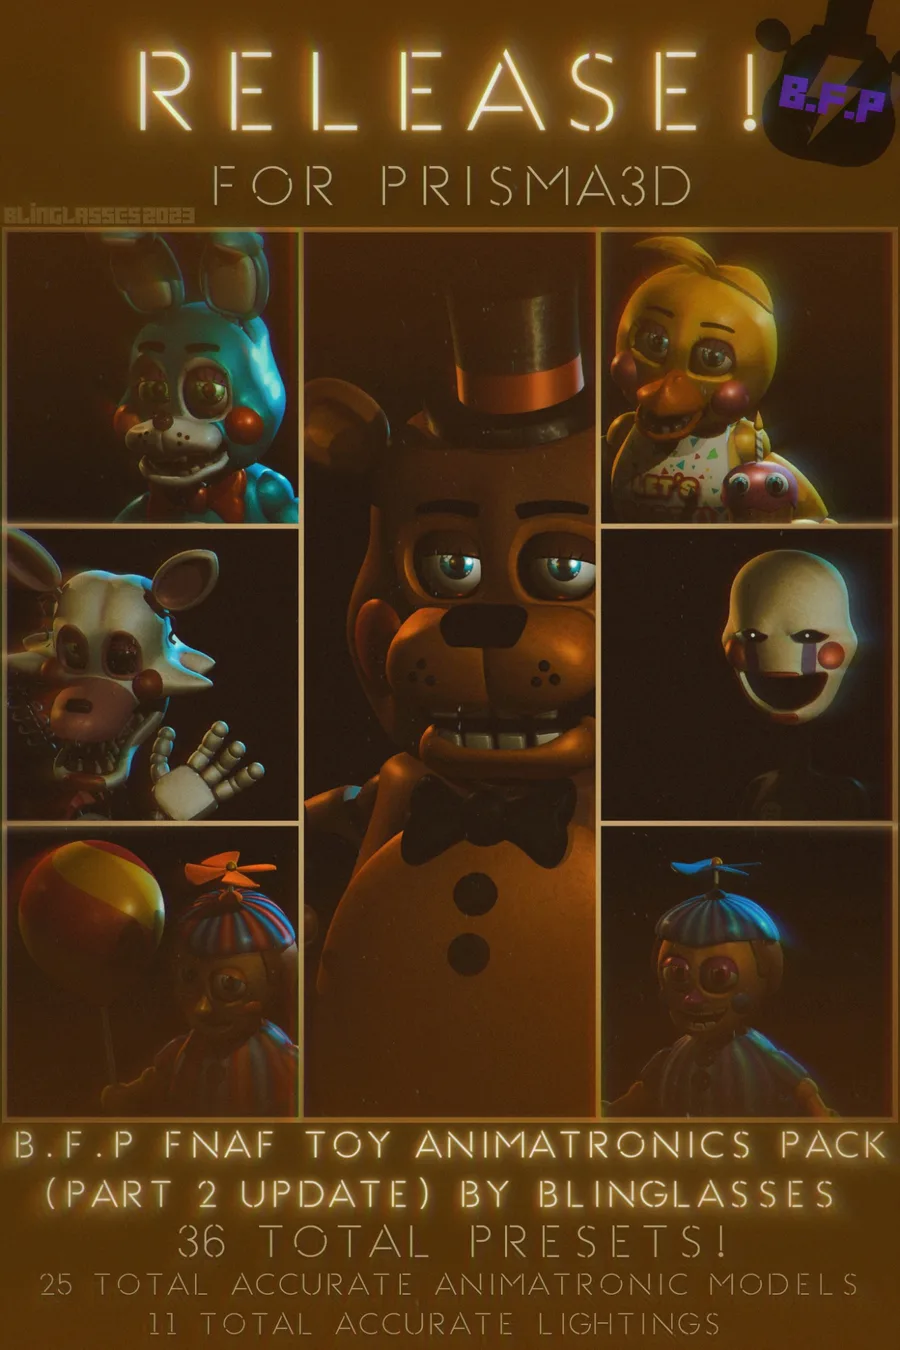 FNAF 2020, Concept Animatronics Recreated in 3D + Poster.